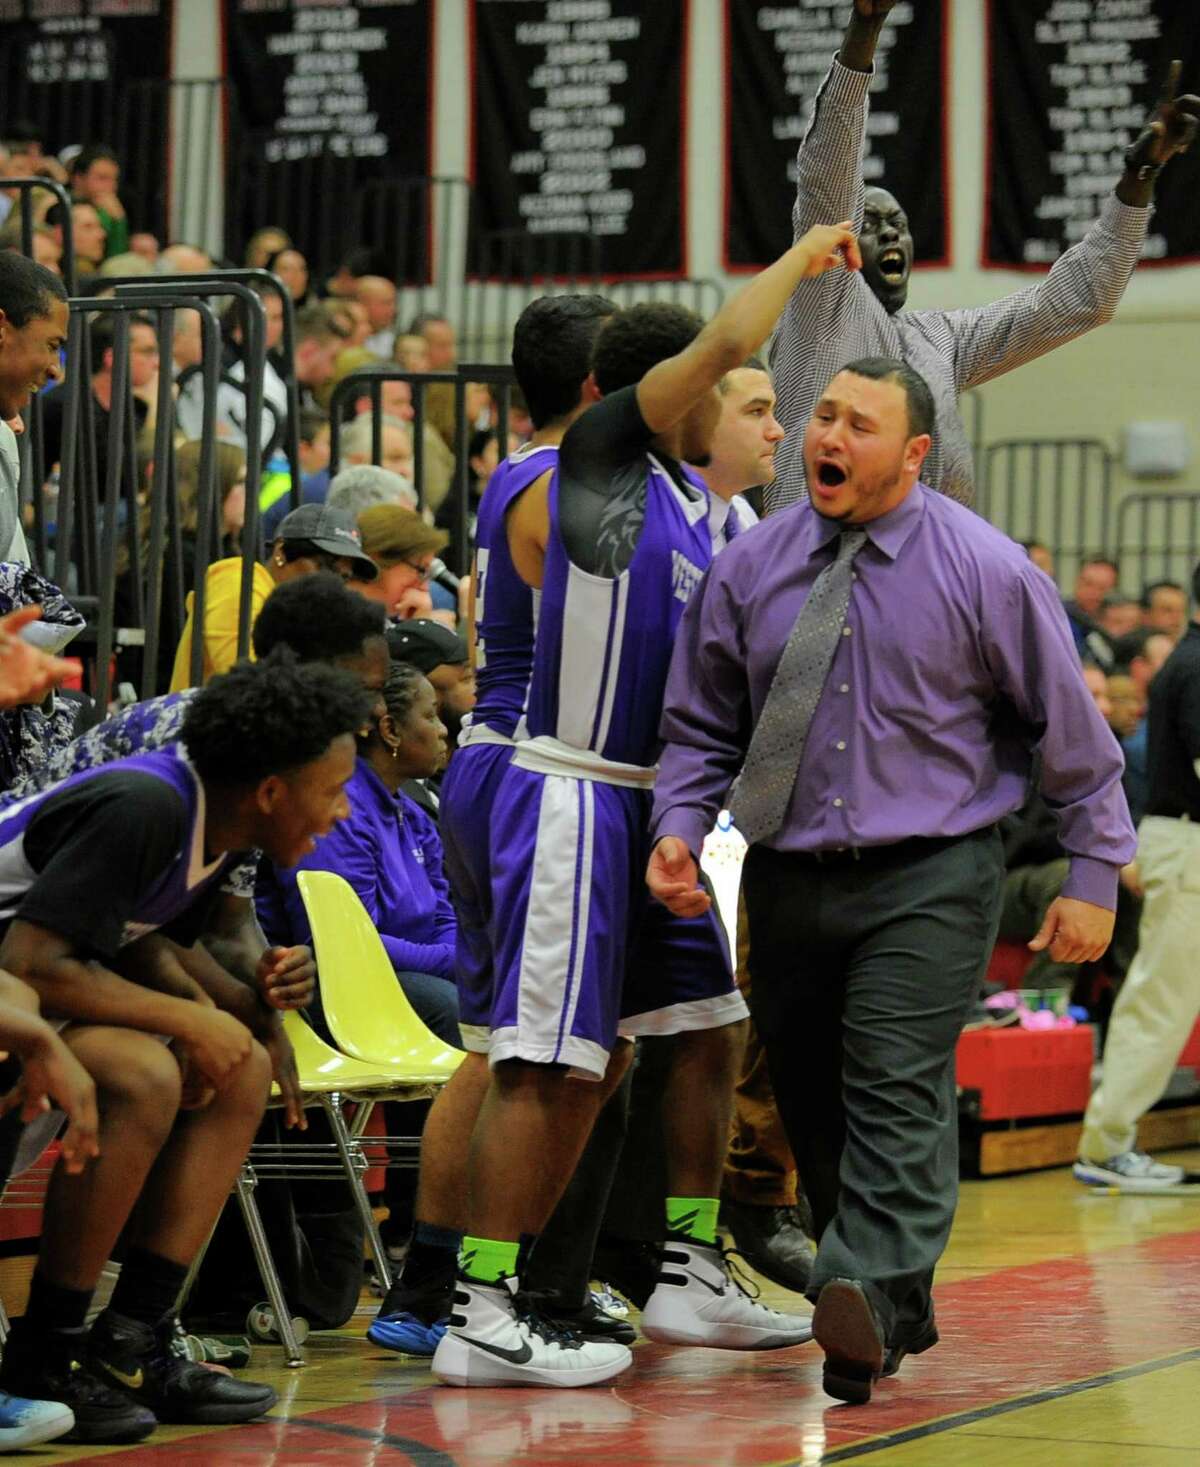 Westhill assistant coach Roberto Nieves celebrates the Vikings 53-43 win over Trumbull in an FCIAC boys basketball semifinal at Warde High School in Fairfield, Conn. on March 1, 2016. Nieves was filling in for Coach Howard White.